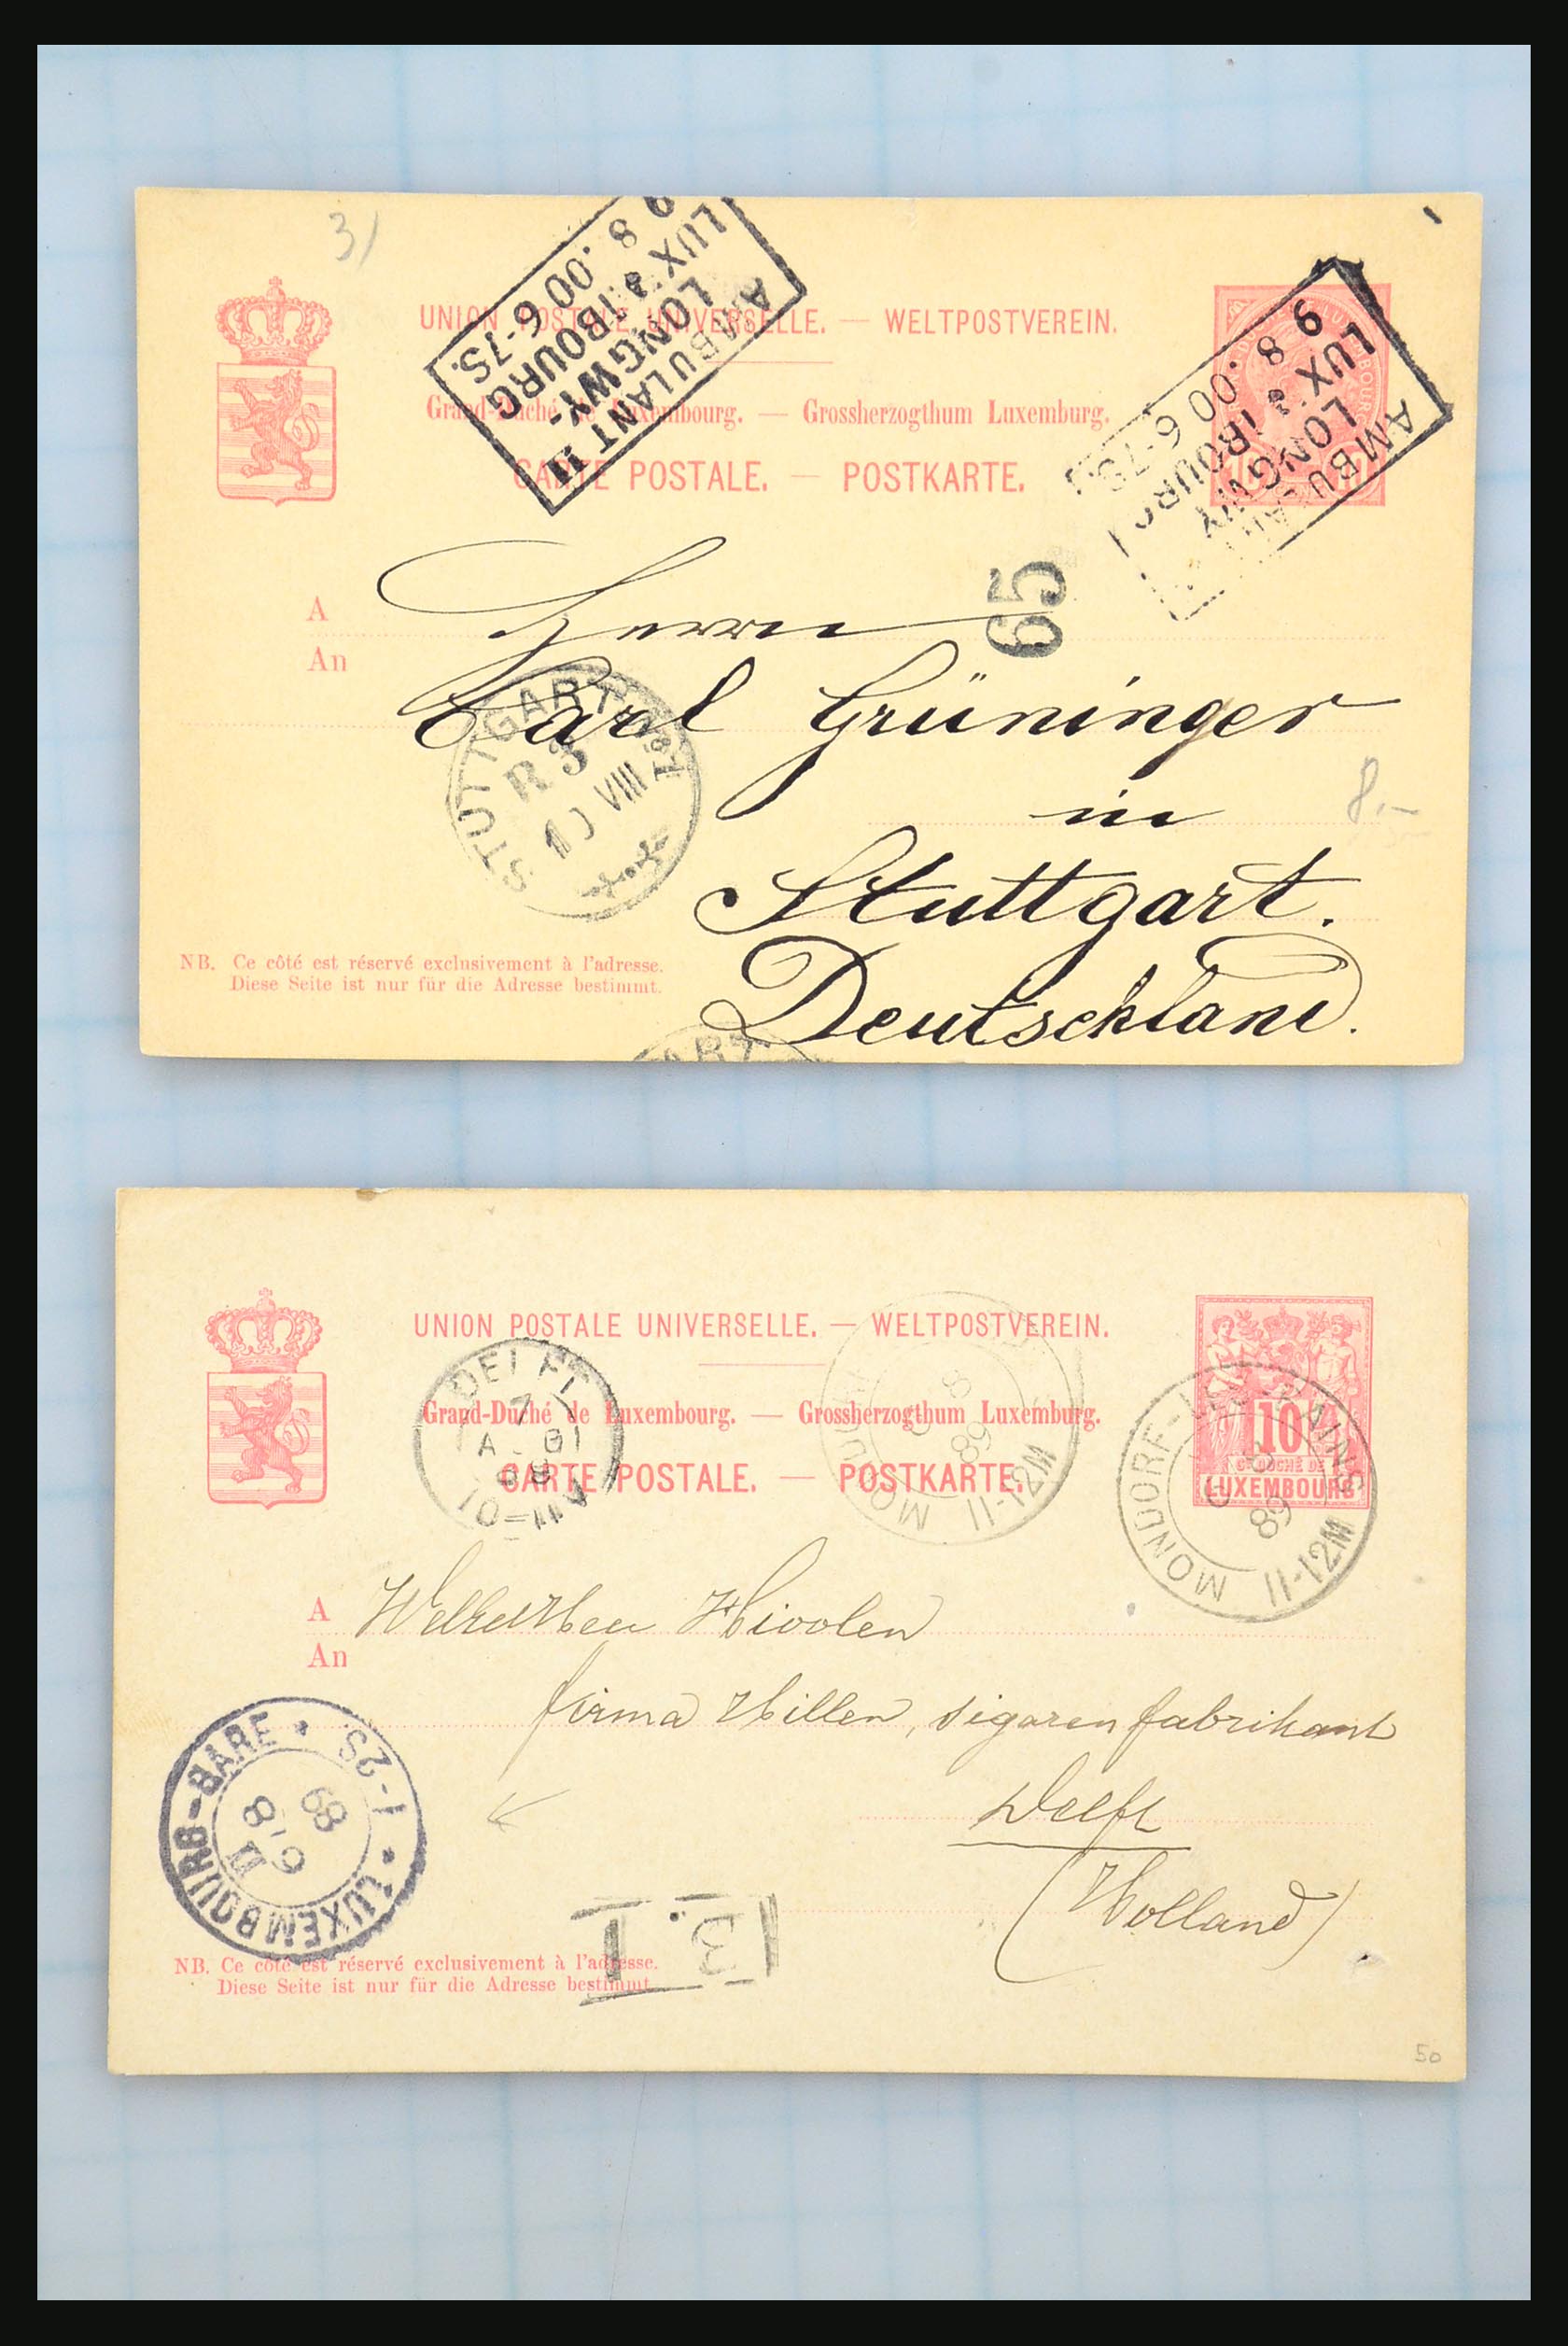 31358 096 - 31358 Portugal/Luxemburg/Greece covers 1880-1960.